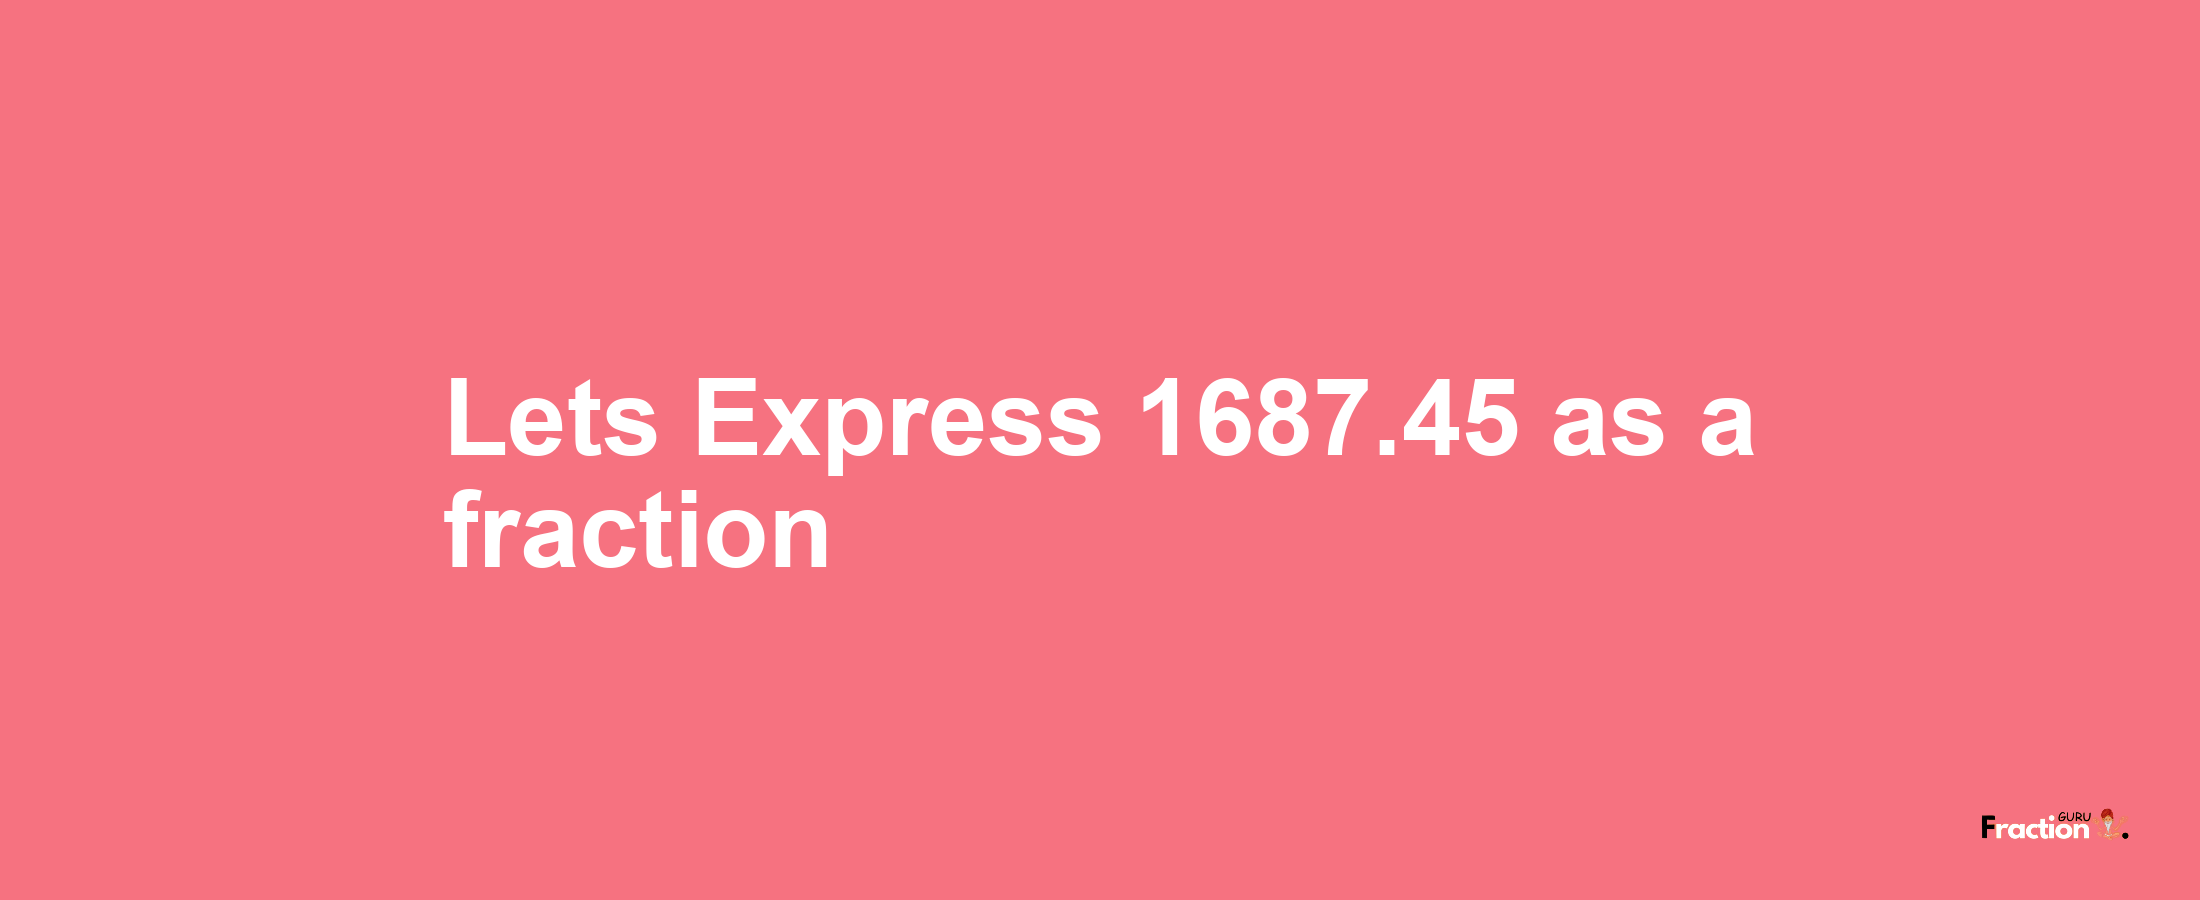 Lets Express 1687.45 as afraction